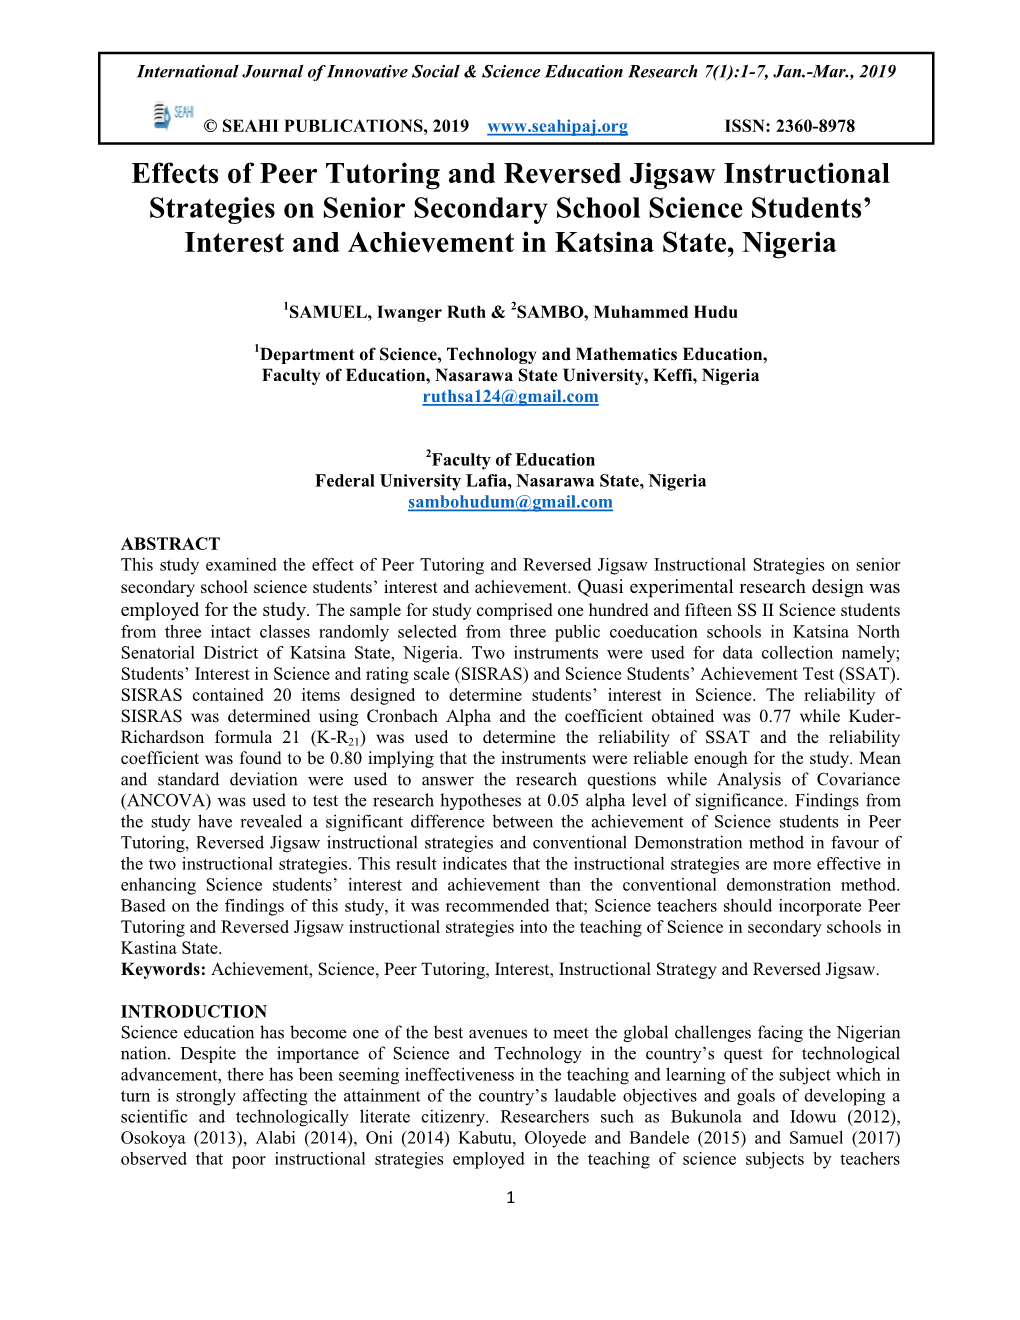 Effects of Peer Tutoring and Reversed Jigsaw Instructional Strategies on Senior Secondary School Science Students’ Interest and Achievement in Katsina State, Nigeria